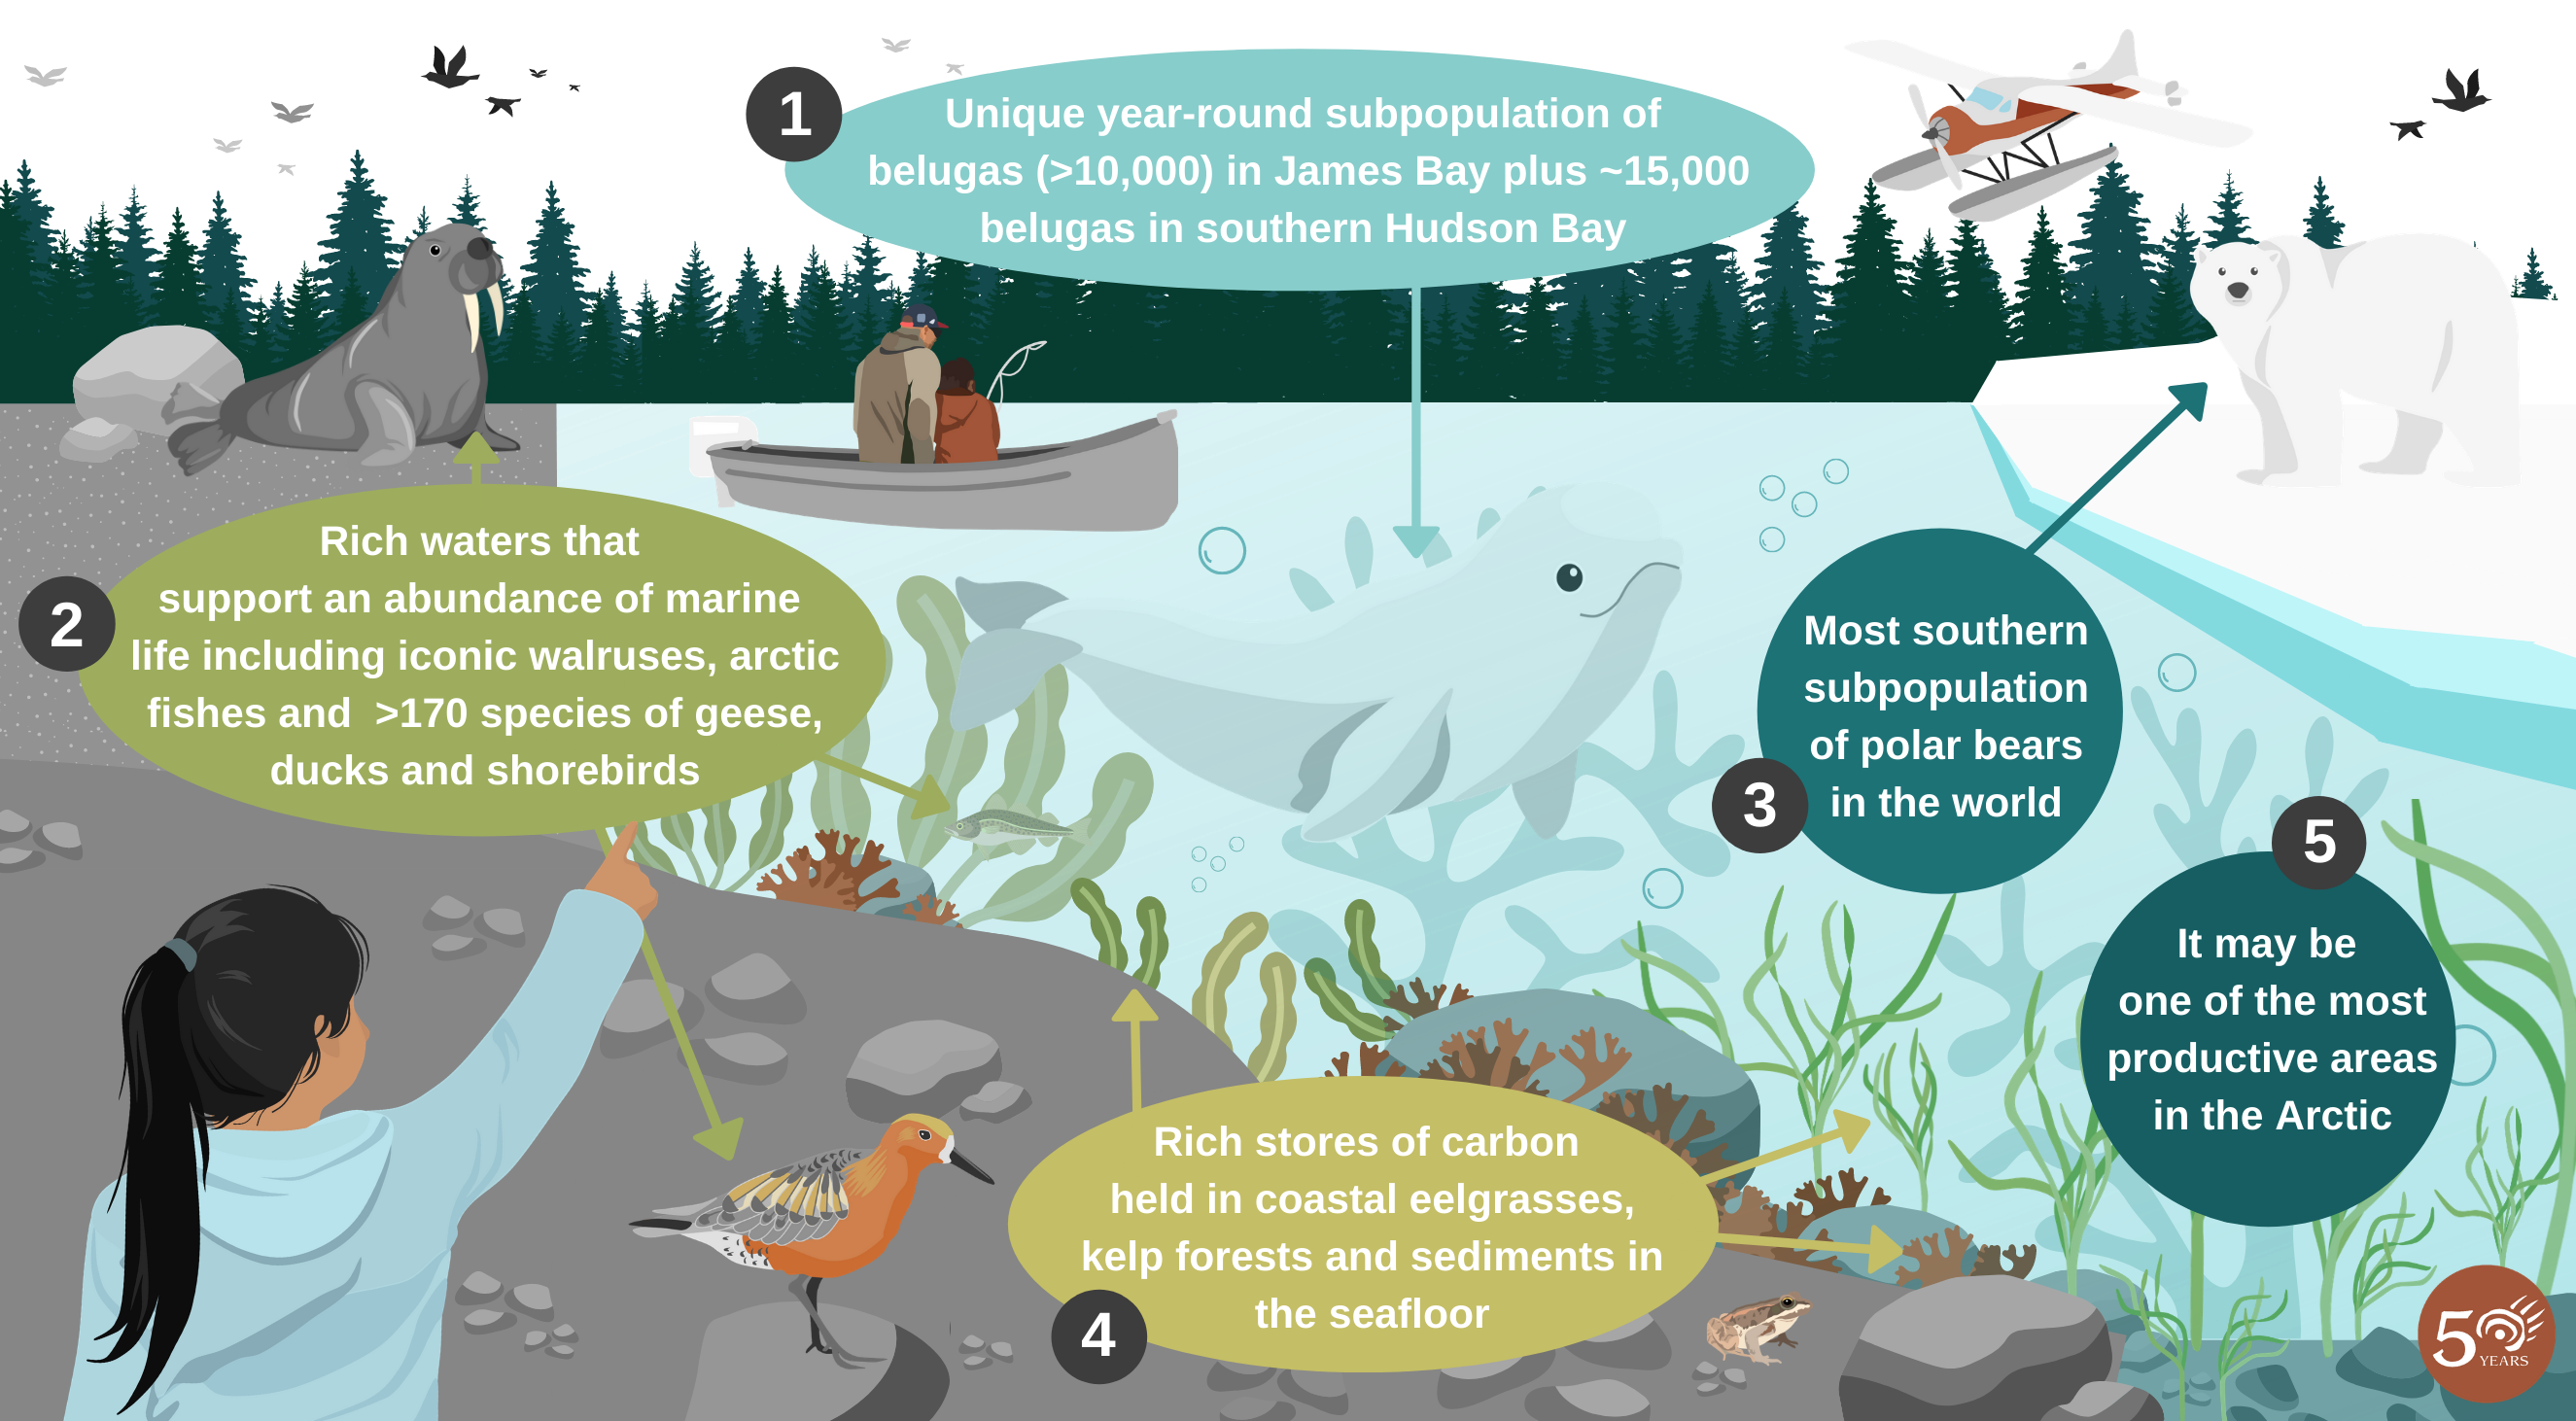 An infographic shows an illustrated coastal marine landscape, with five text bubbles describing features unique to southern Hudson Bay and western James Bay. In the foreground we see a girl pointing to the sky, and nearby a red knot (rufus subspecies) has landed on a rock. Further in the distance we see a cross section of the water, with a beluga and various seaweed and seagrass. There is a boat with an adult and child fishing on the water, elsewhere there is an ice floe with a polar bear. In the distance, is a walrus on shore, a boreal tree line and a float plane in the sky. Bubble 1: Unique year-round subpopulation of belugas (greater than 10,000) in James Bay plus roughly 15,000 belugas in southern Hudson Bay. Bubble 2: Rich waters that support an abundance of marine life including iconic walruses, arctic fishes and more than 170 species of geese, ducks and shorebirds. Bubble 3: Most southern subpopulation of polar bears in the world. Bubble 4: Rich stores of carbon held in coastal eel grasses, kelp forests and sediments in the seafloor. Bubble 5: It may be one of the most productive areas in the arctic.